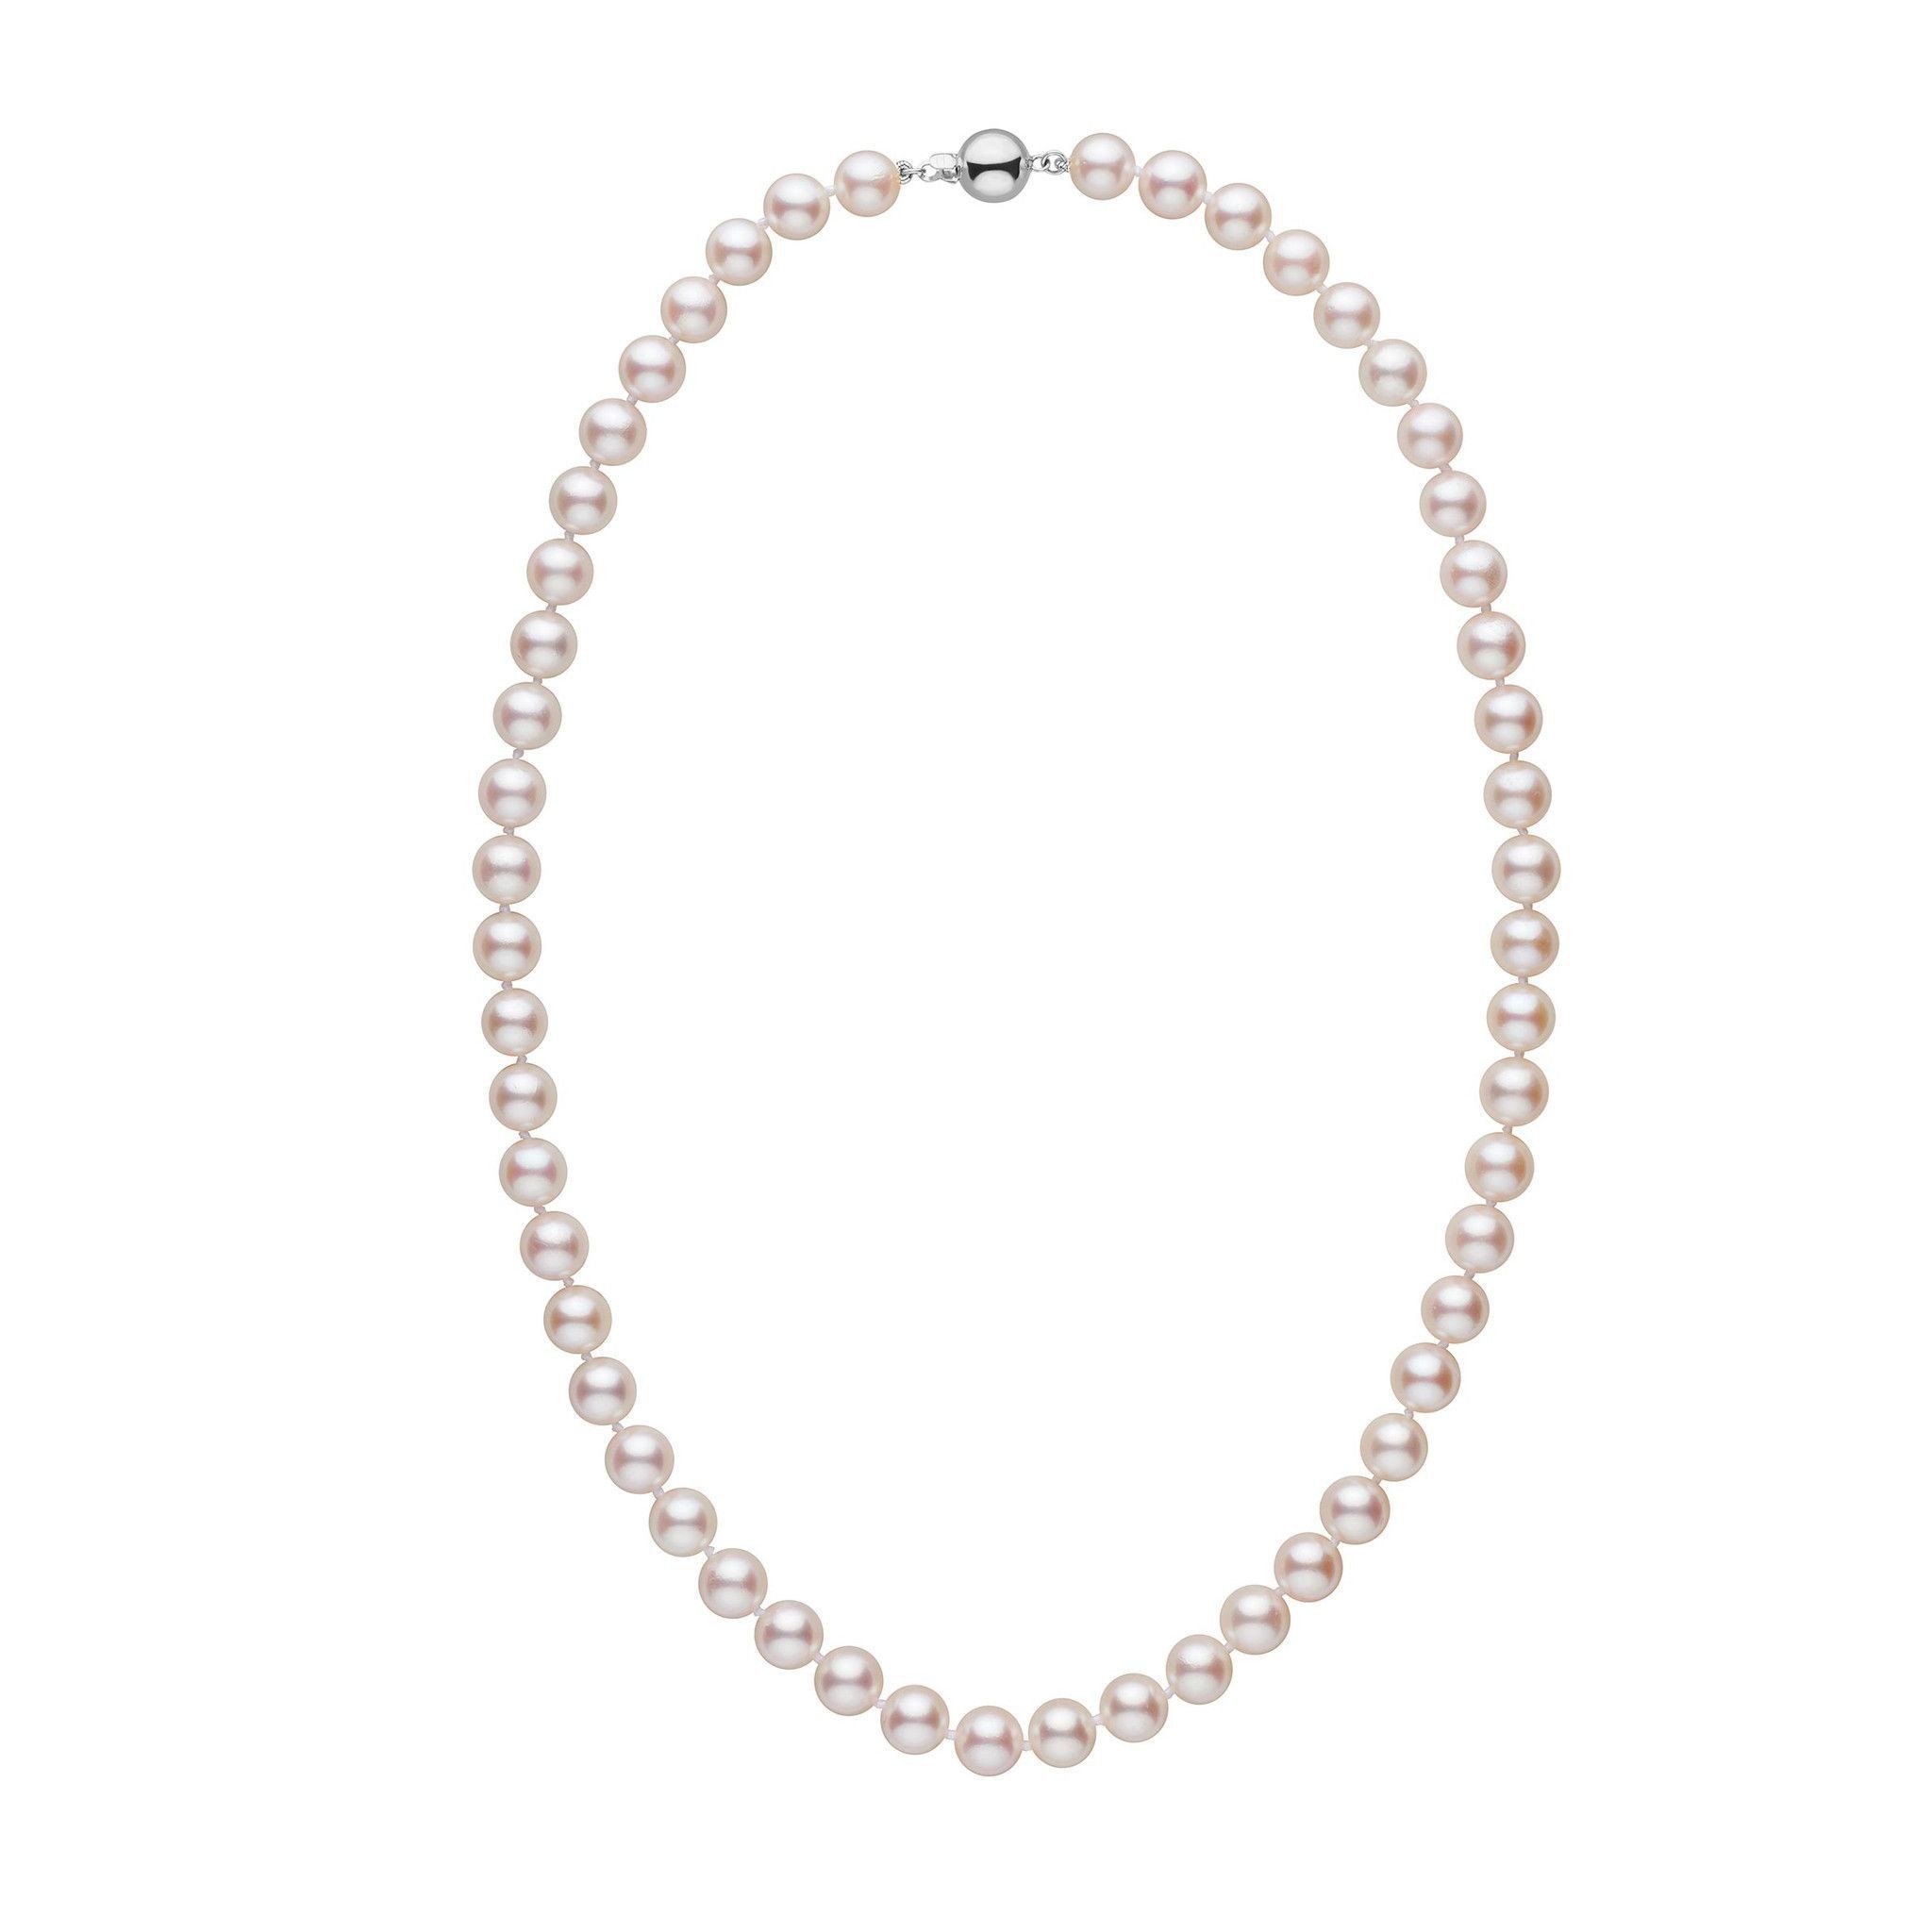 7.5-8.0 mm 18 inch AA+ White Akoya Pearl Necklace white gold